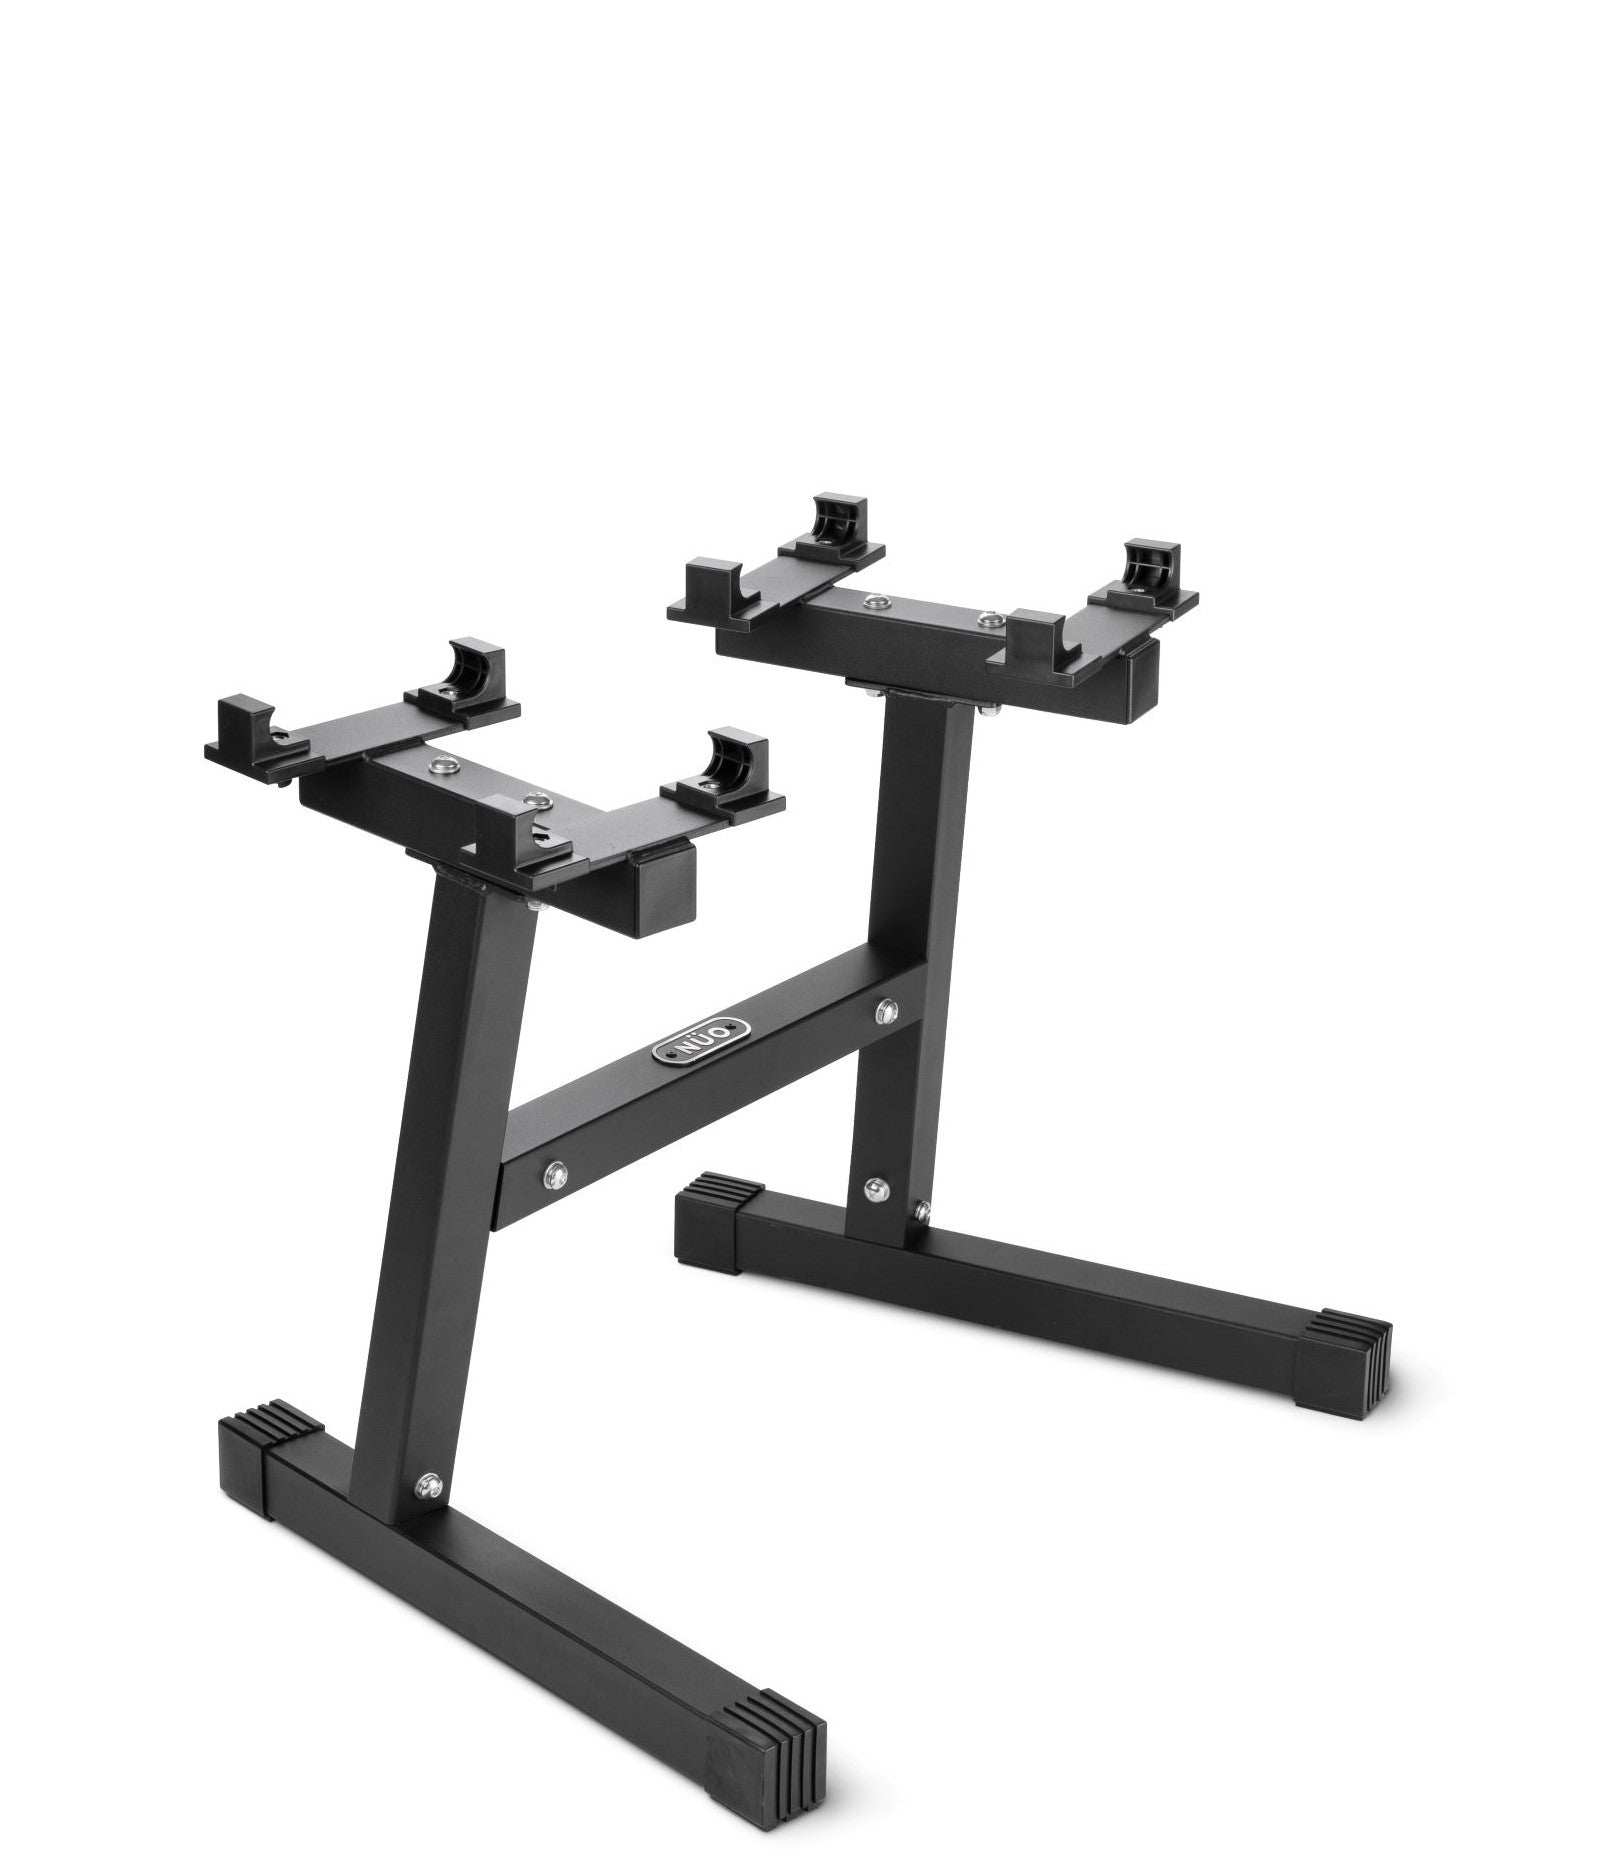 Nuobell Adjustable Dumbbell Stand-Dumbbell Stand-Nuobell Athletics-7